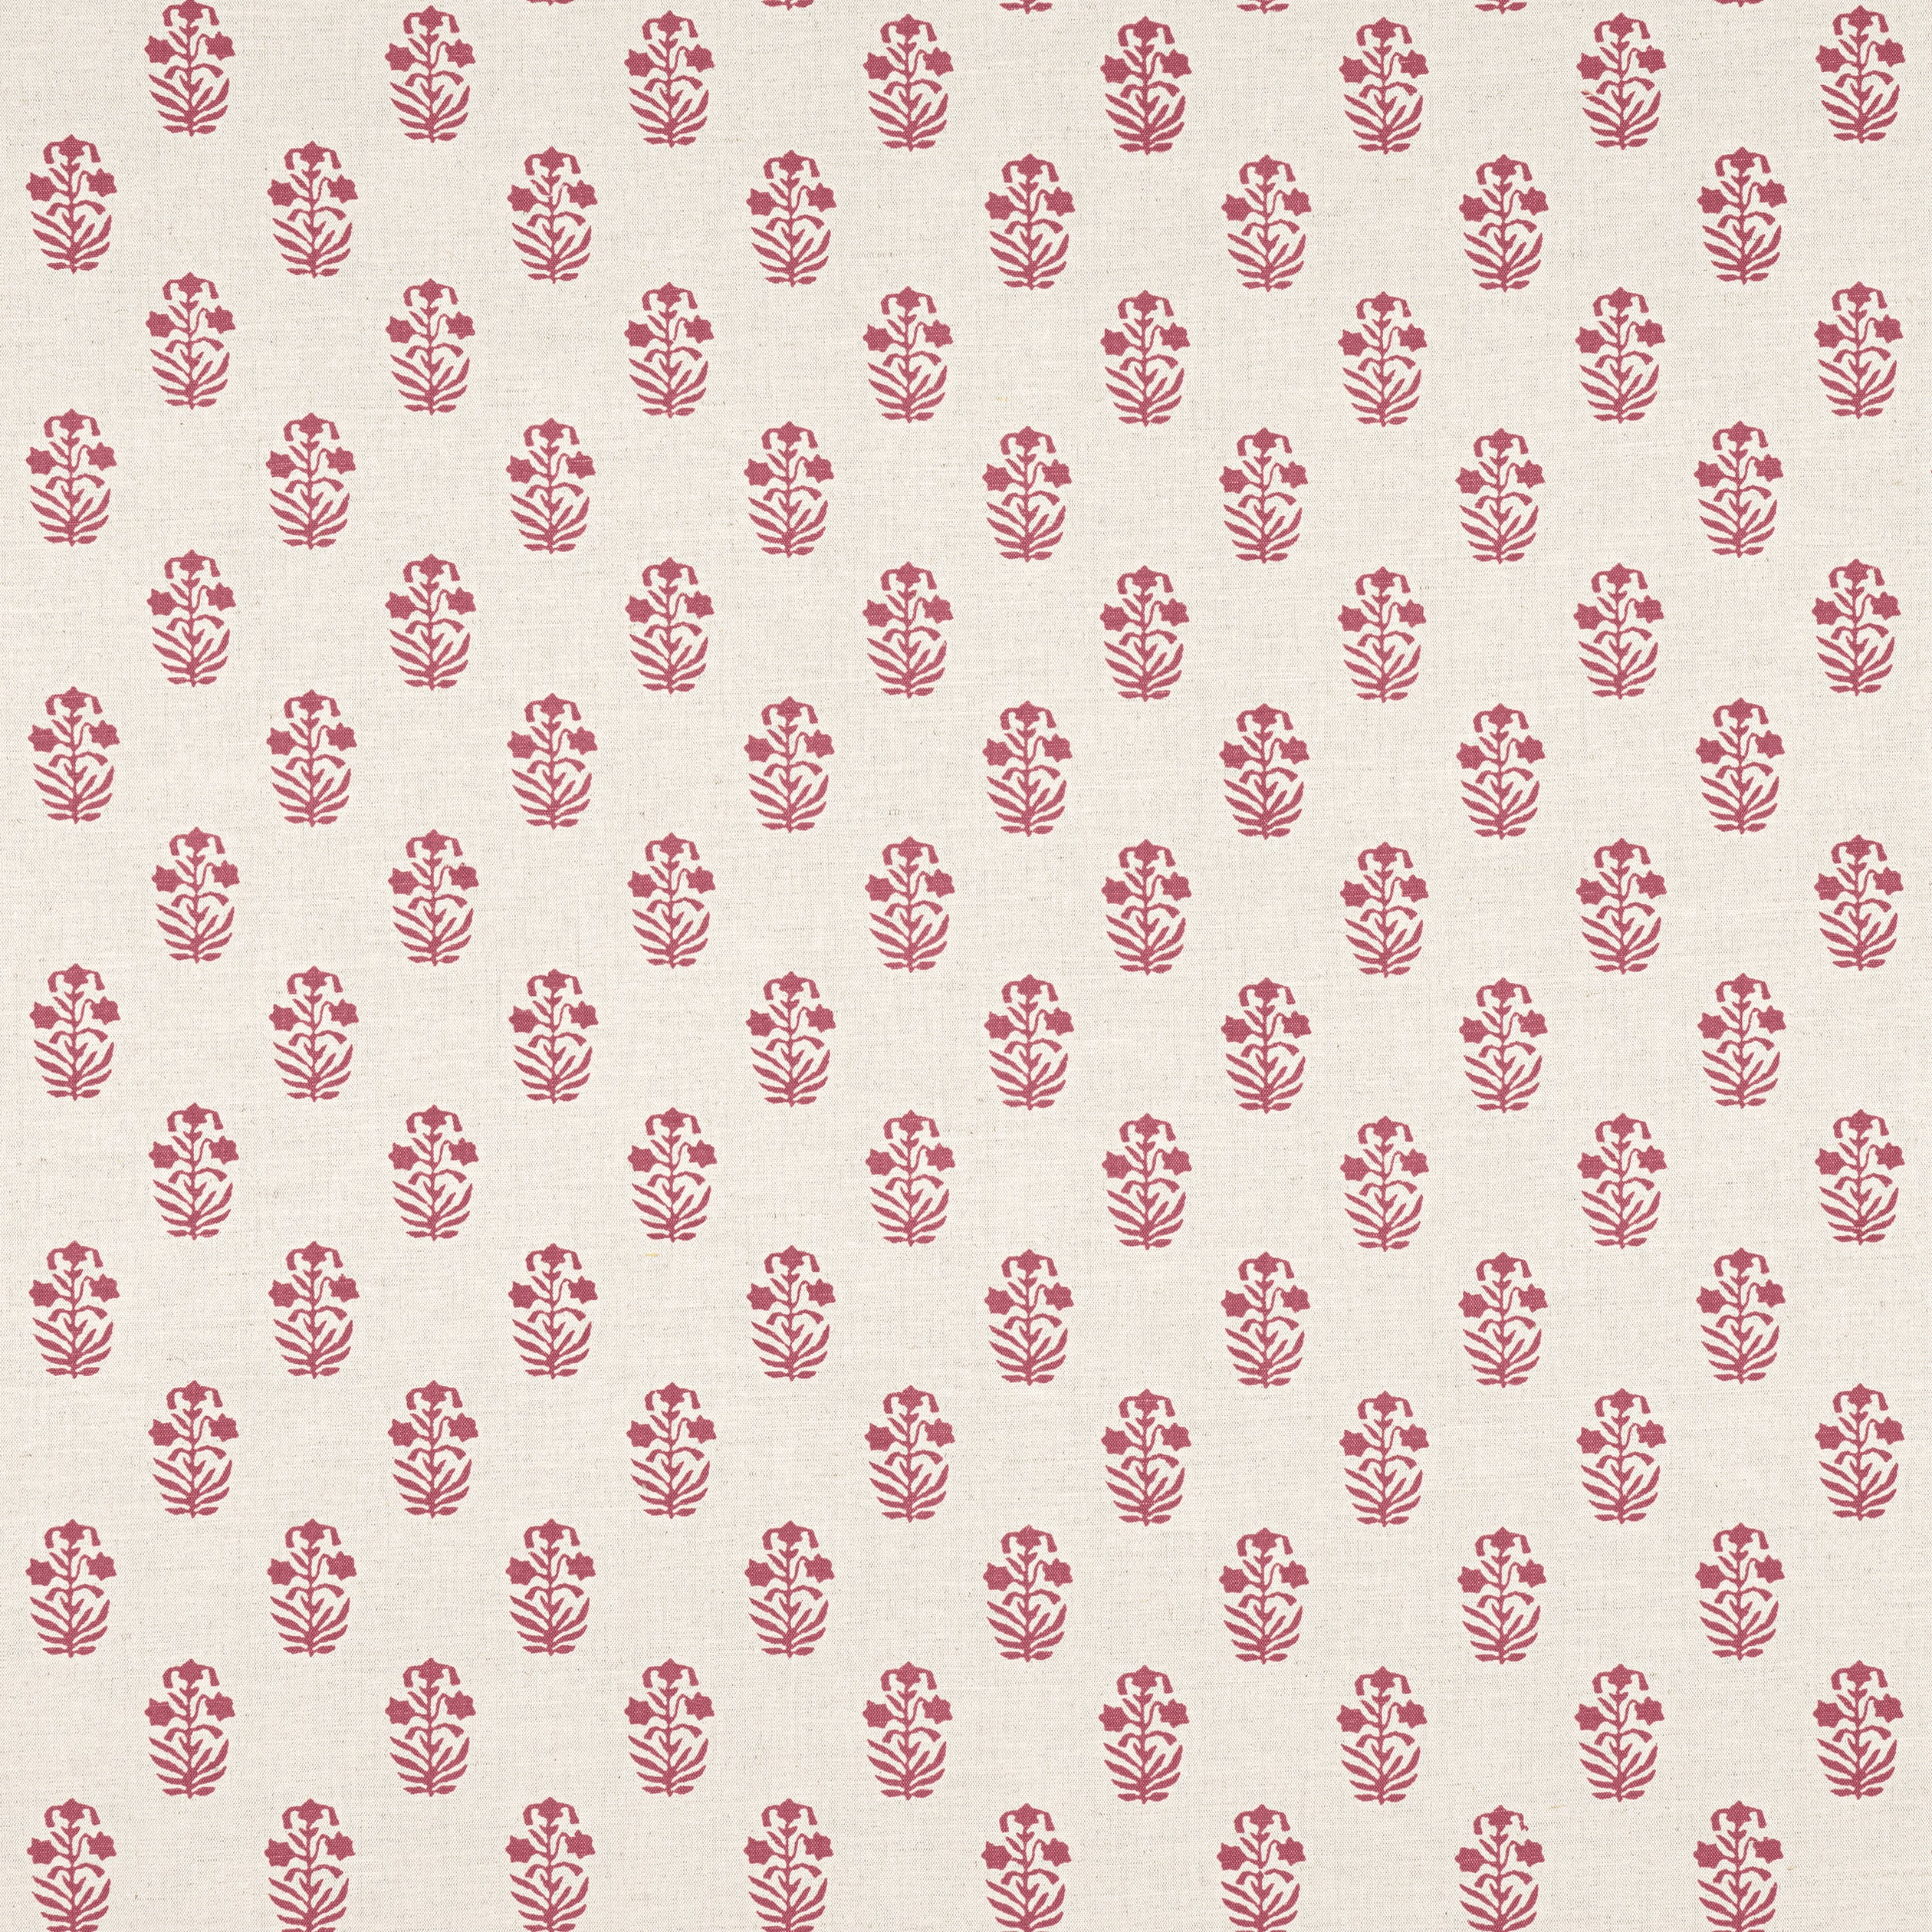 Corwin fabric in raspberry on natural color - pattern number F936406 - by Thibaut in the Indienne collection